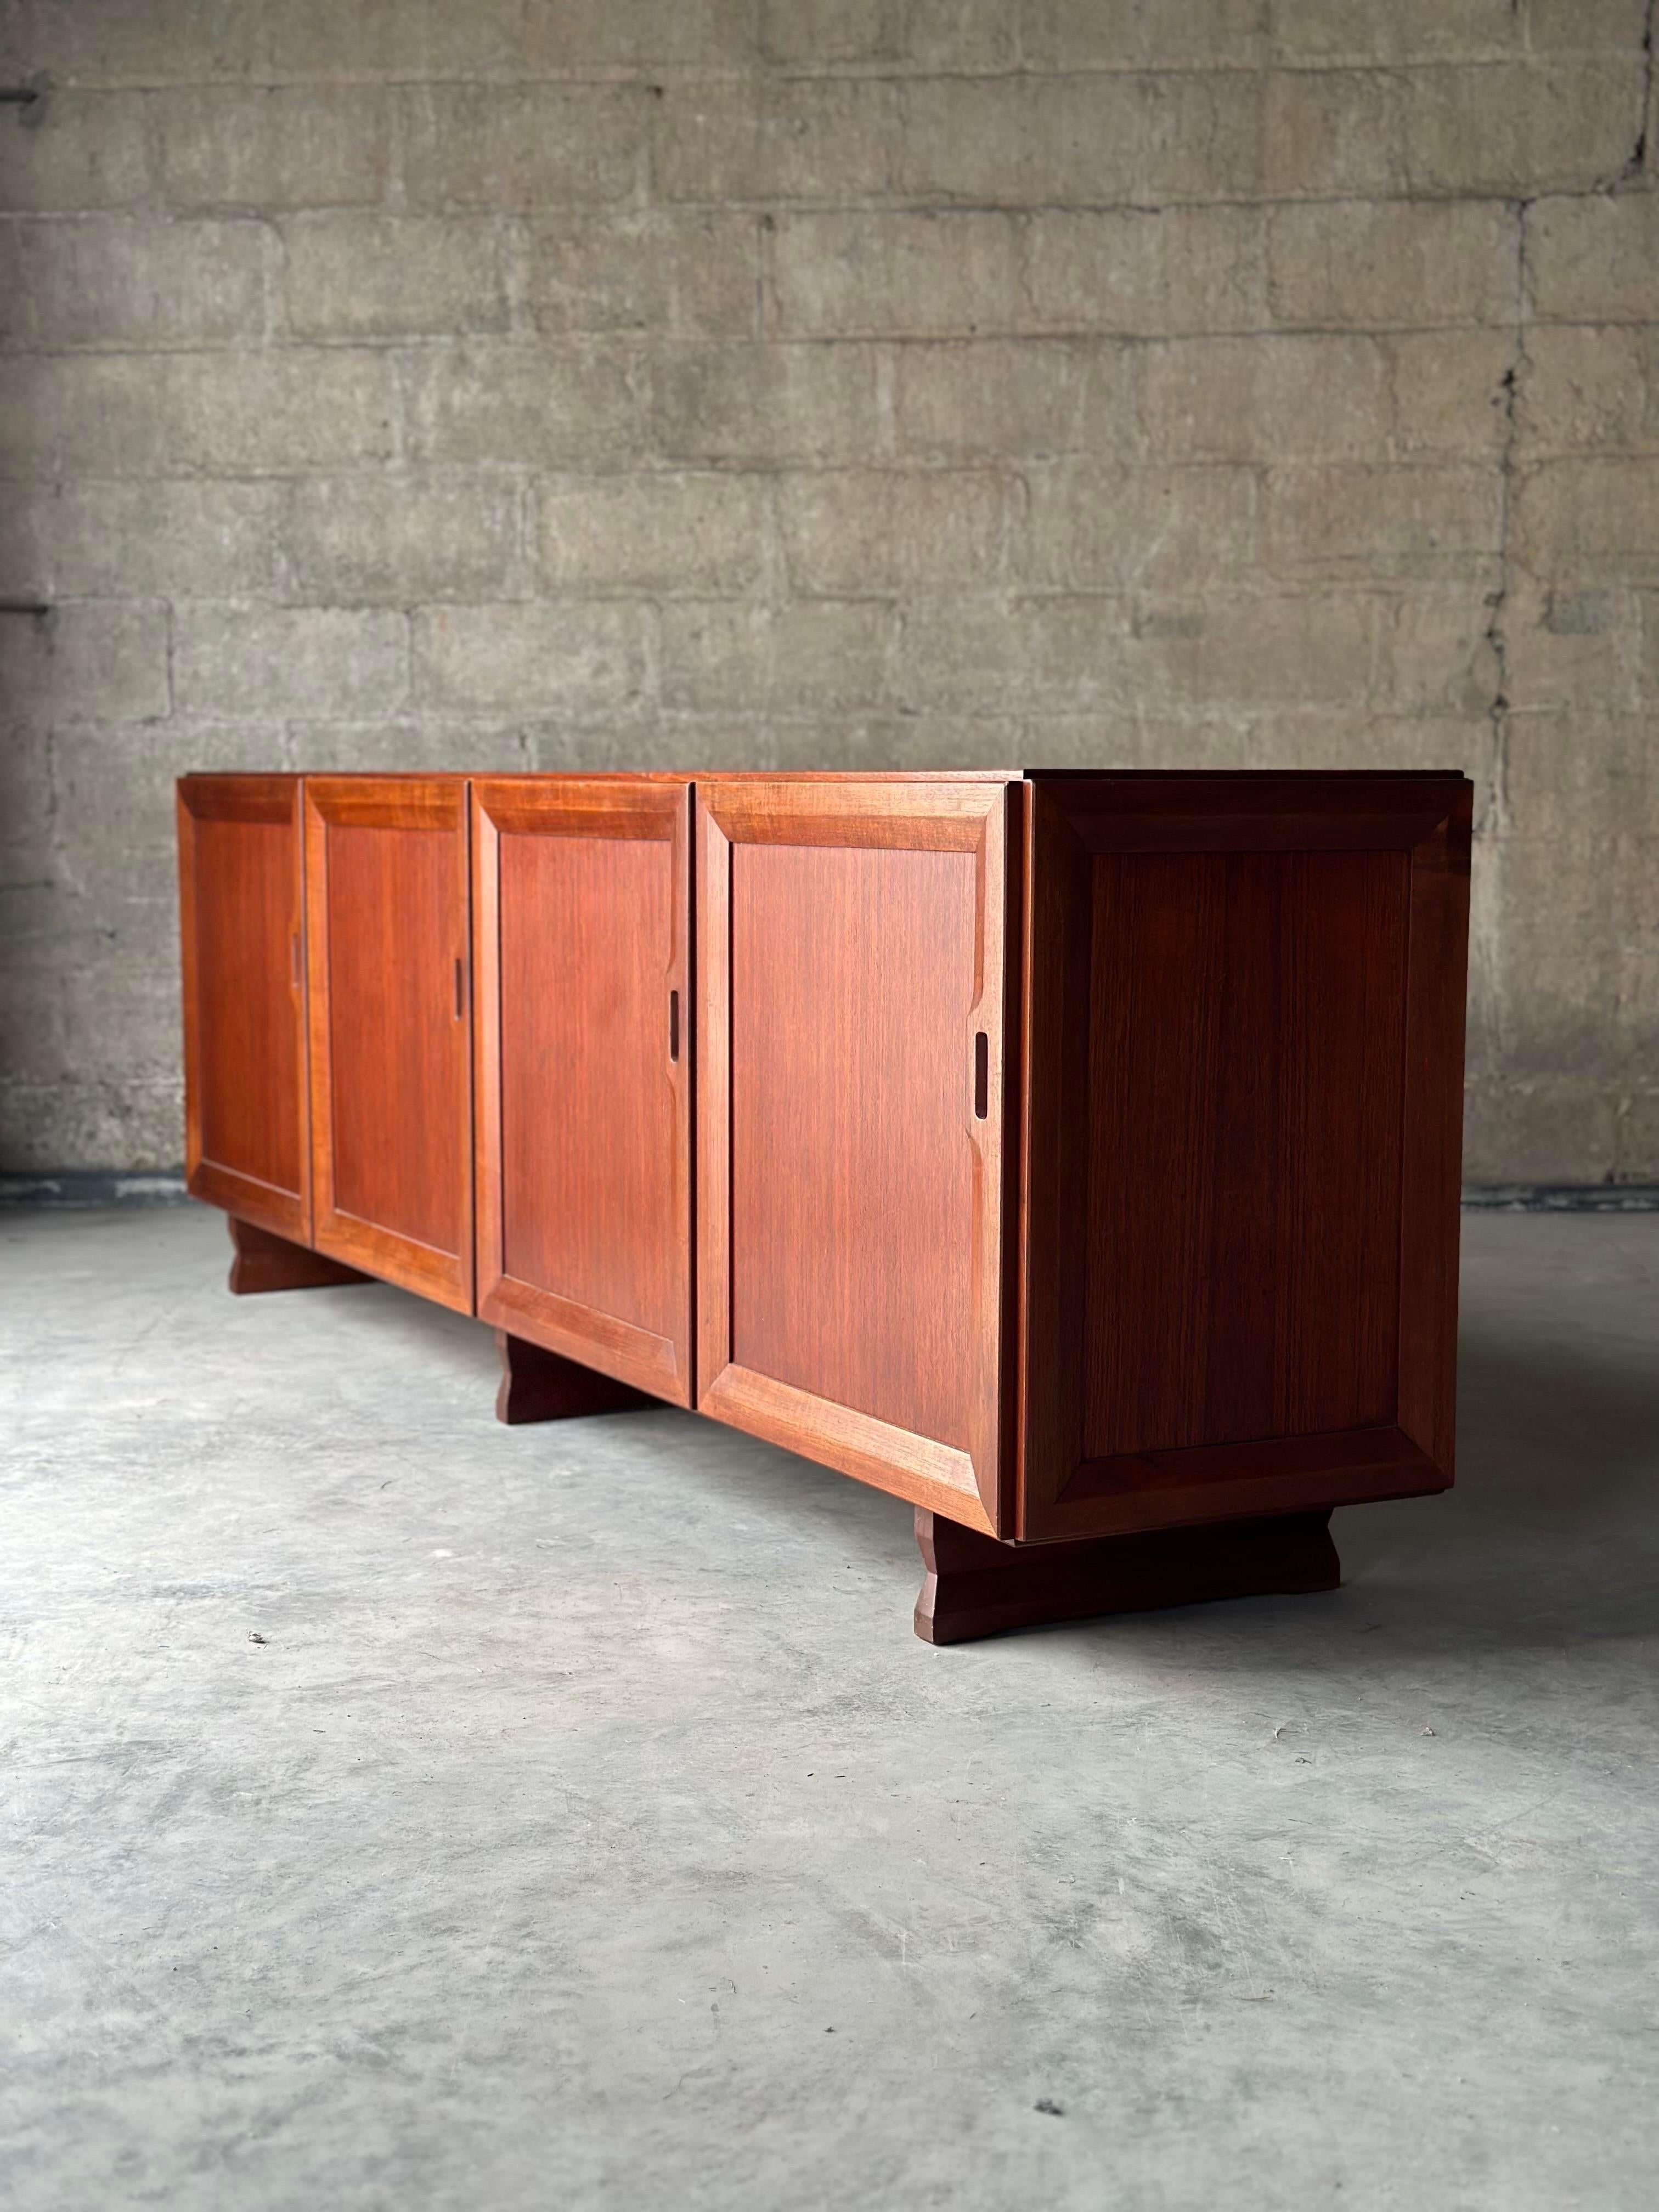 An Italian model MB 51 sideboard designed by Franco Albini for Poggi. Made of solid teak with a minimalist design and sharp lines.